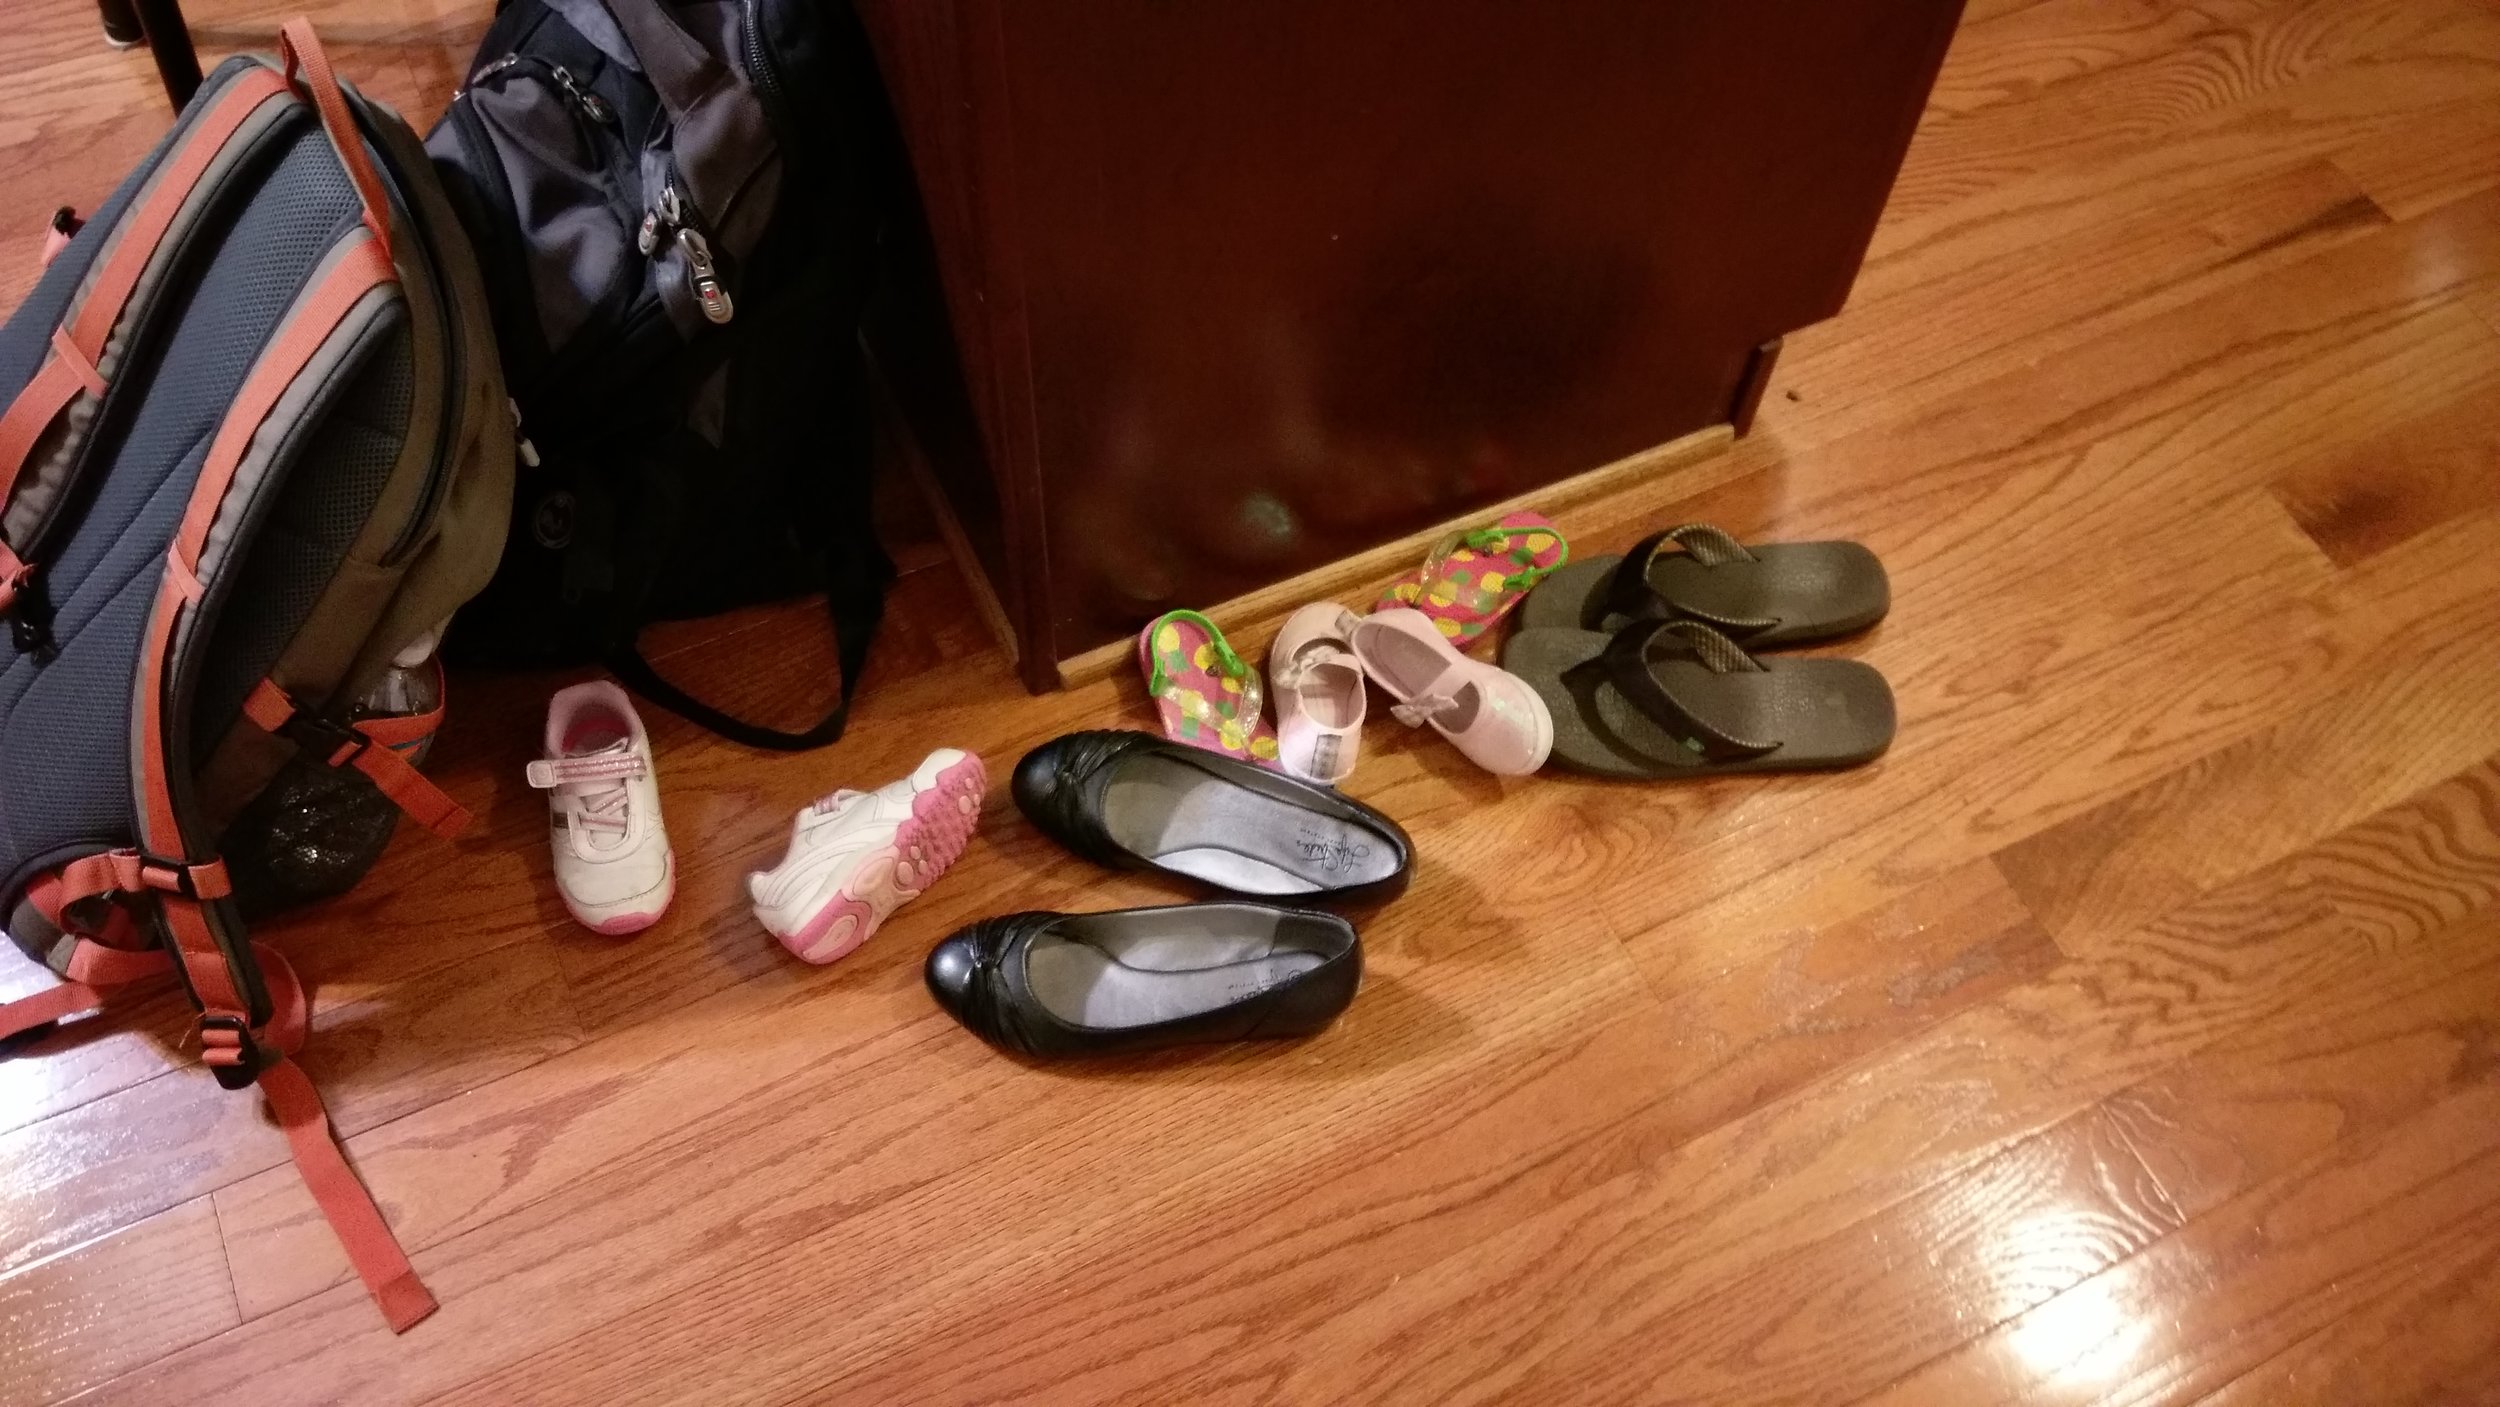 Cece and Rizzo keep a collection of shoes in the kitchen